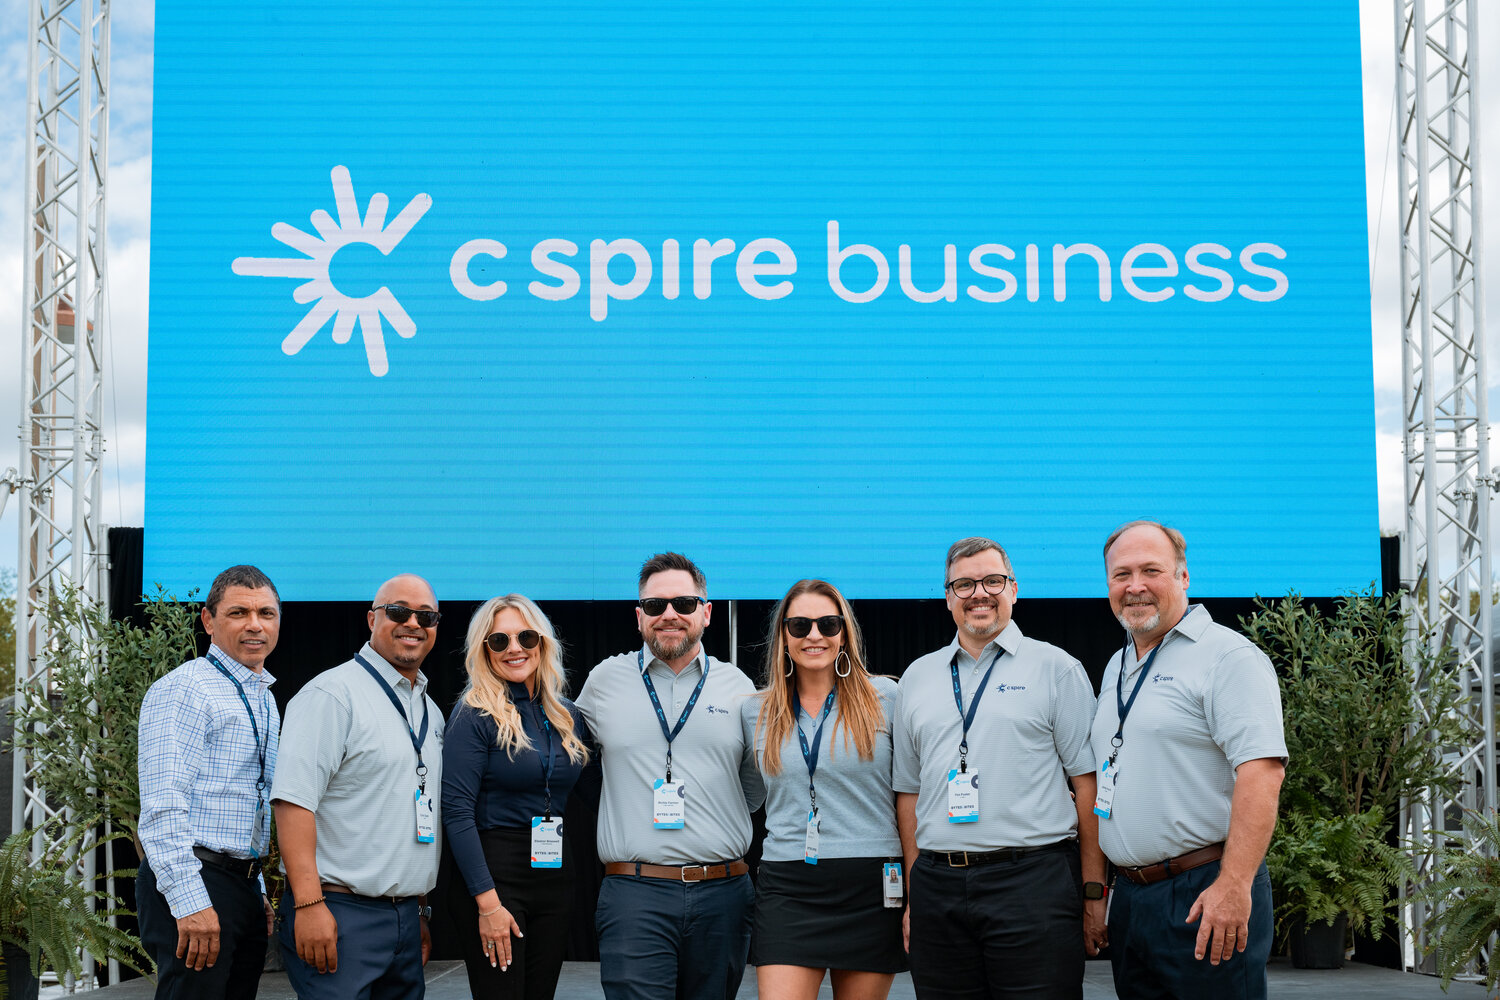 Executives participating in C Spire’s Bytes & Bites event include, from left, Jerry Jackson, Colin Clark, Eleanor Braswell, Richie Farmer, Aimee Hemphill, Tim Foster and Jim Hurst.